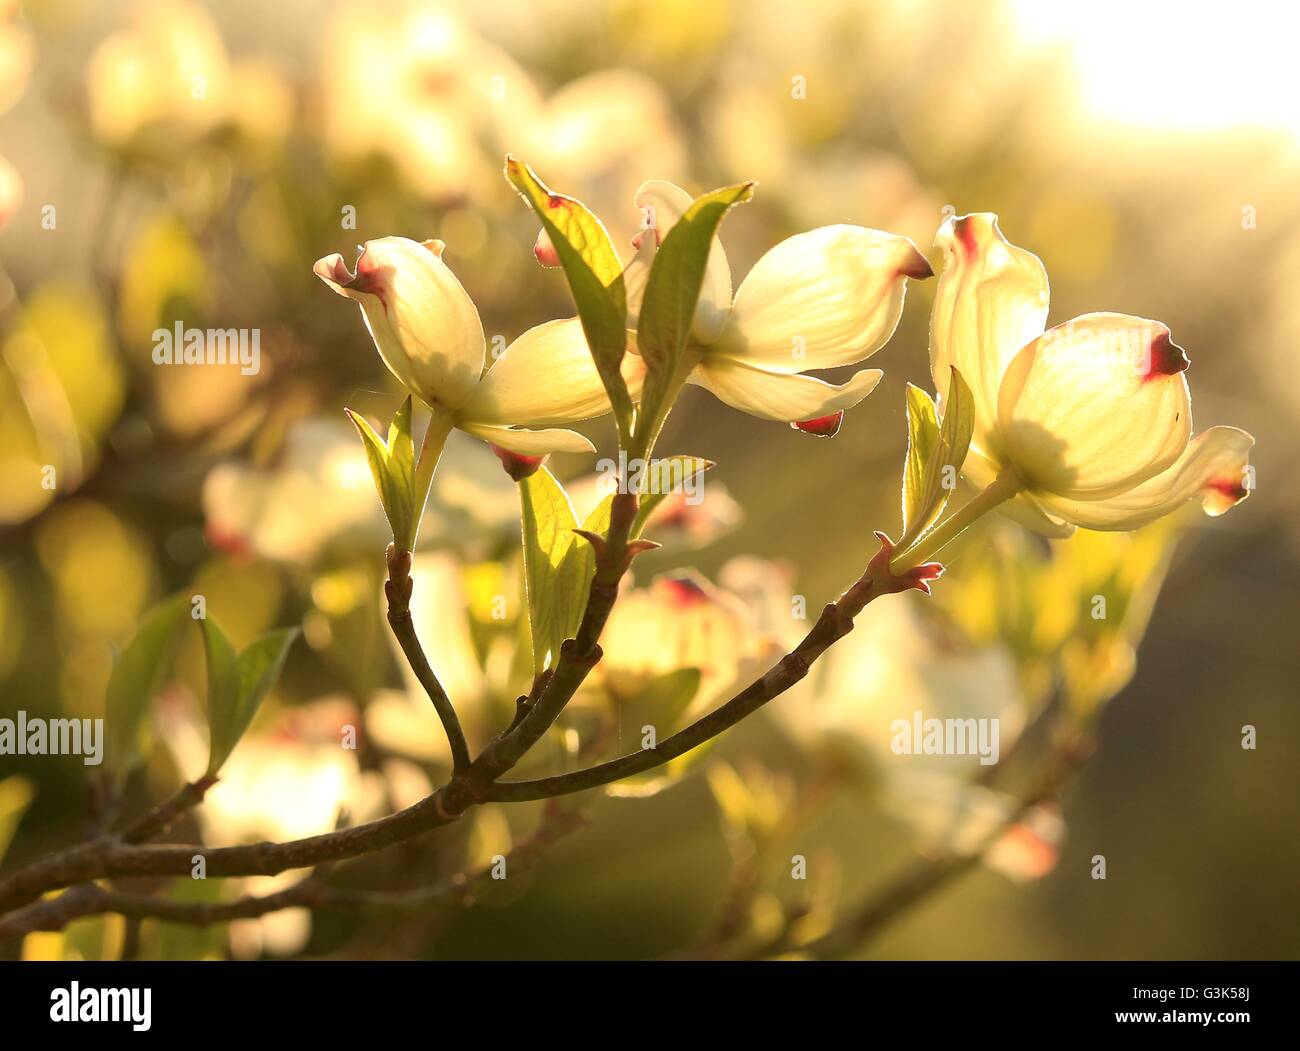 Blooming dogwood flowers lit by the sun; spring in the Midwest Stock Photo